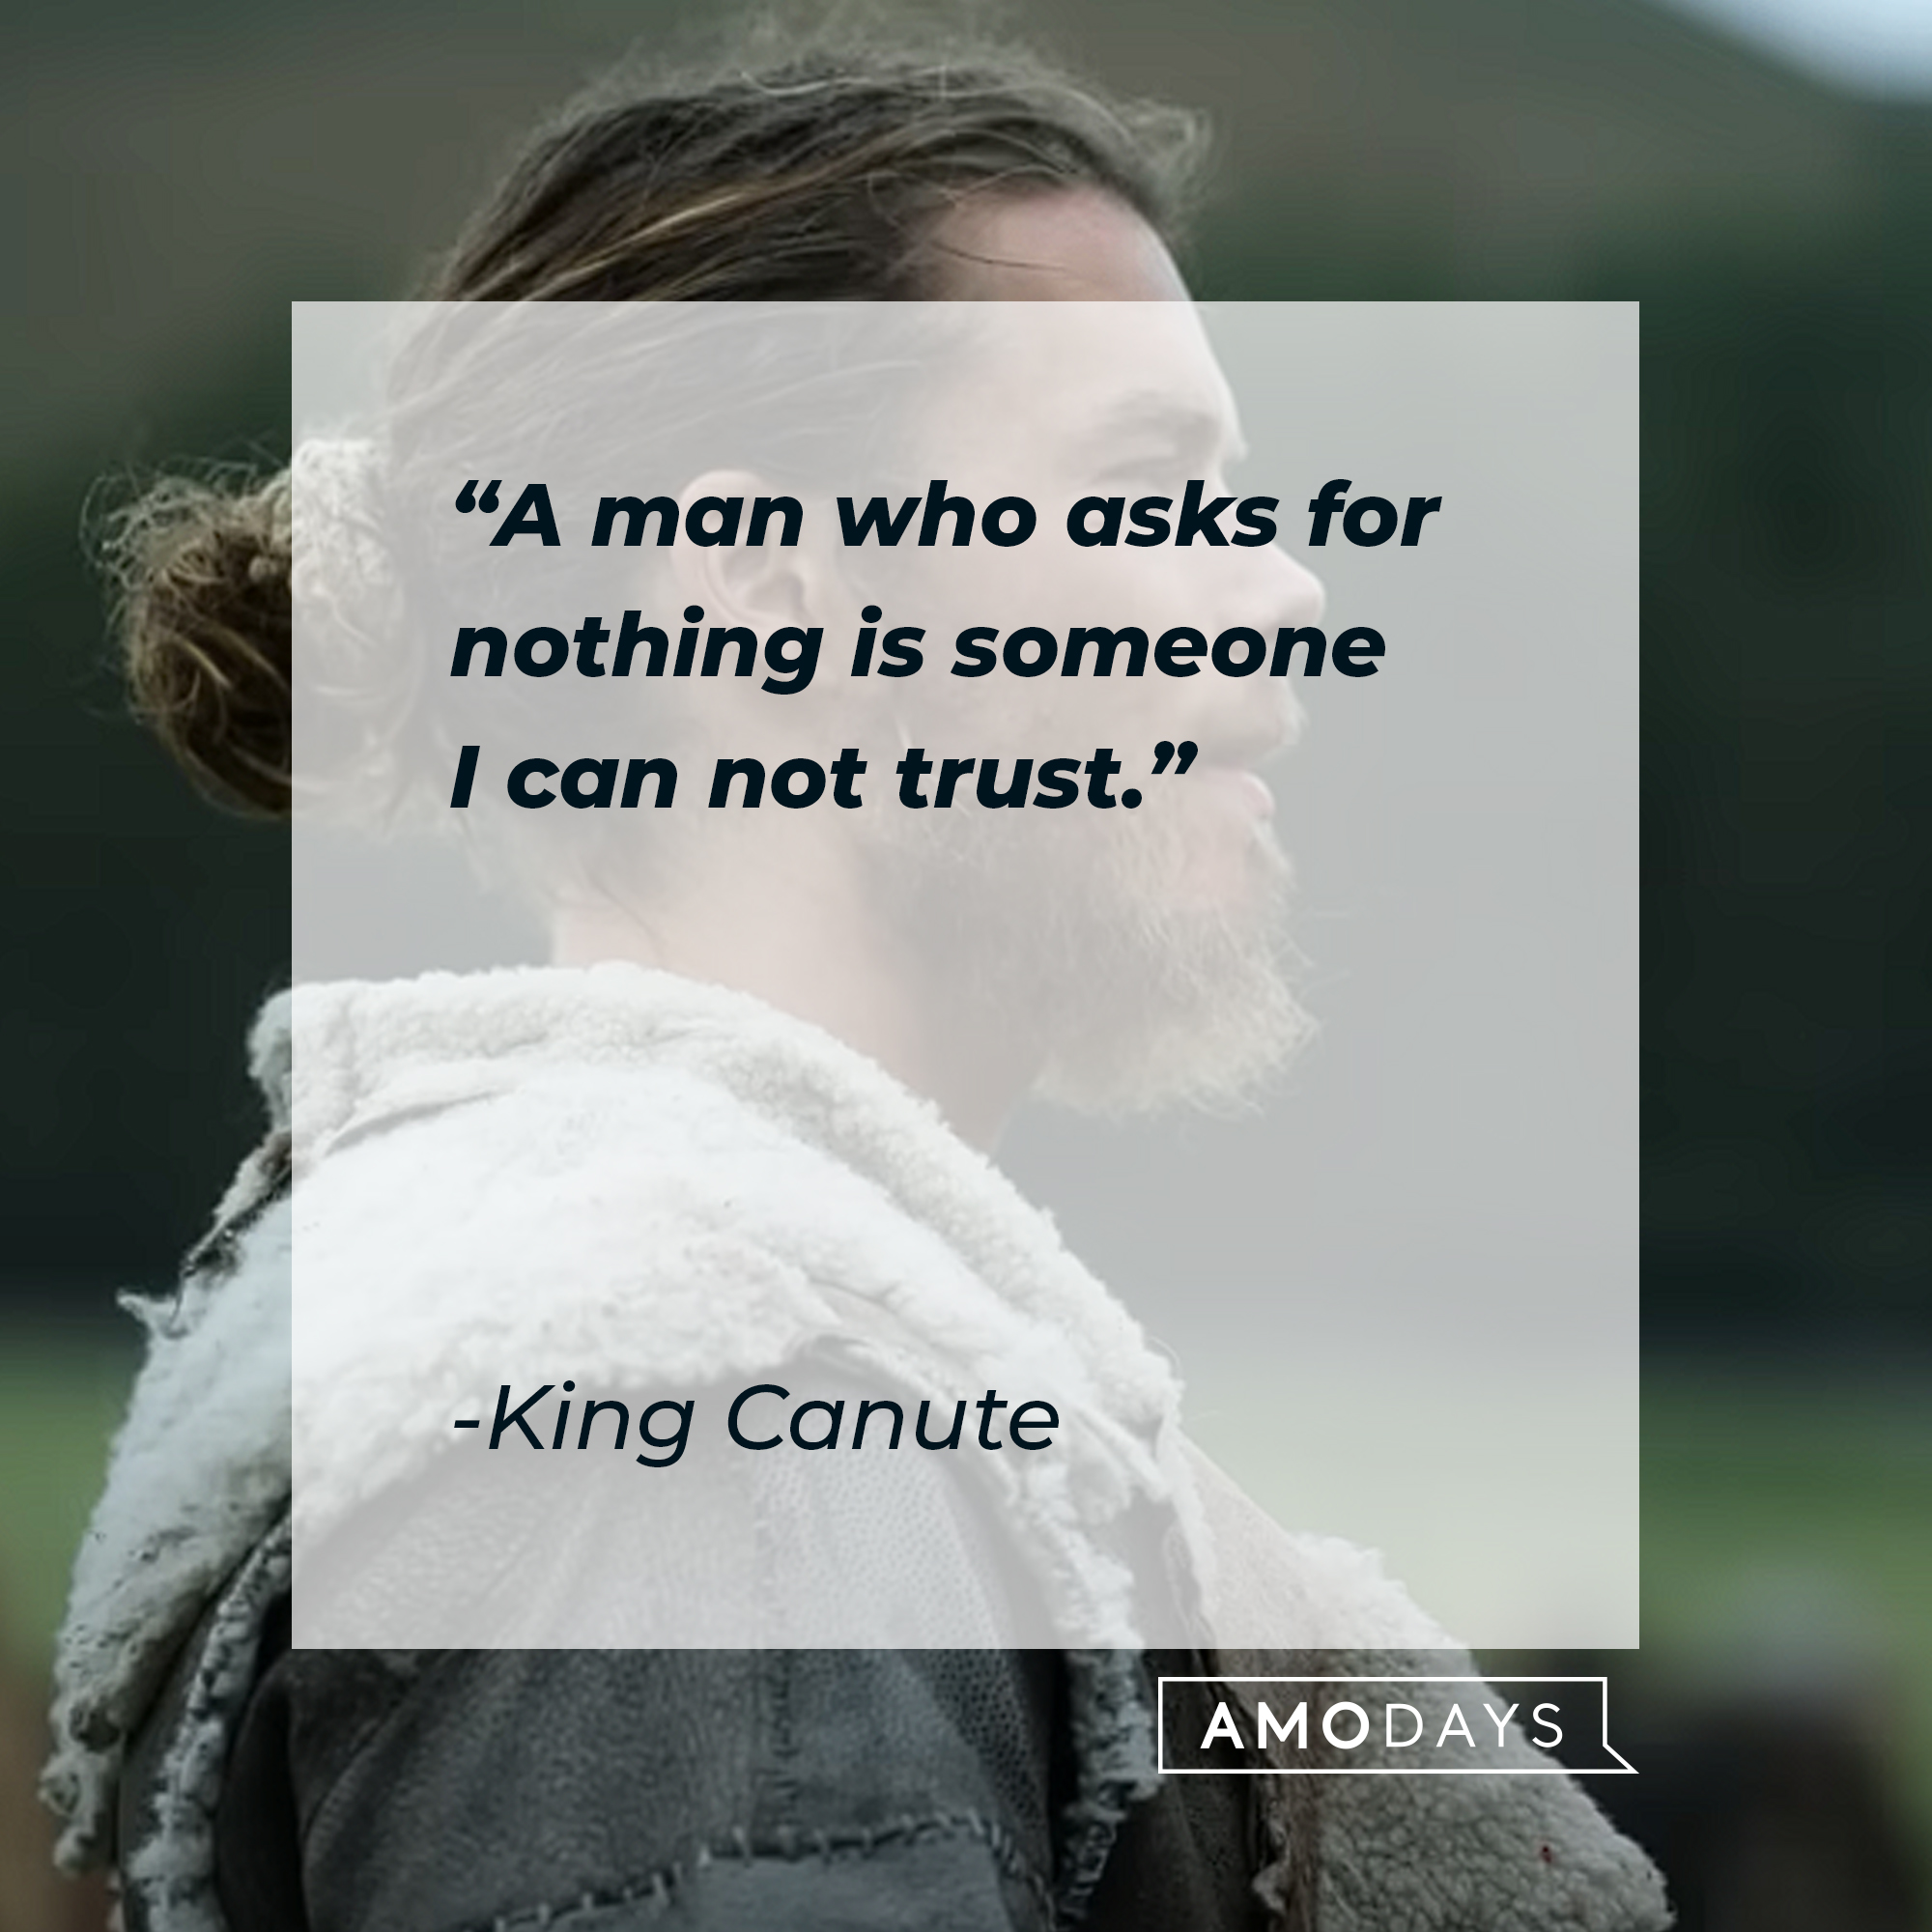 A picture of Harald Sigurdsson with King Canute’s quote: “A man who asks for nothing is someone I can not trust.” | Source: youtube.com/Netflix